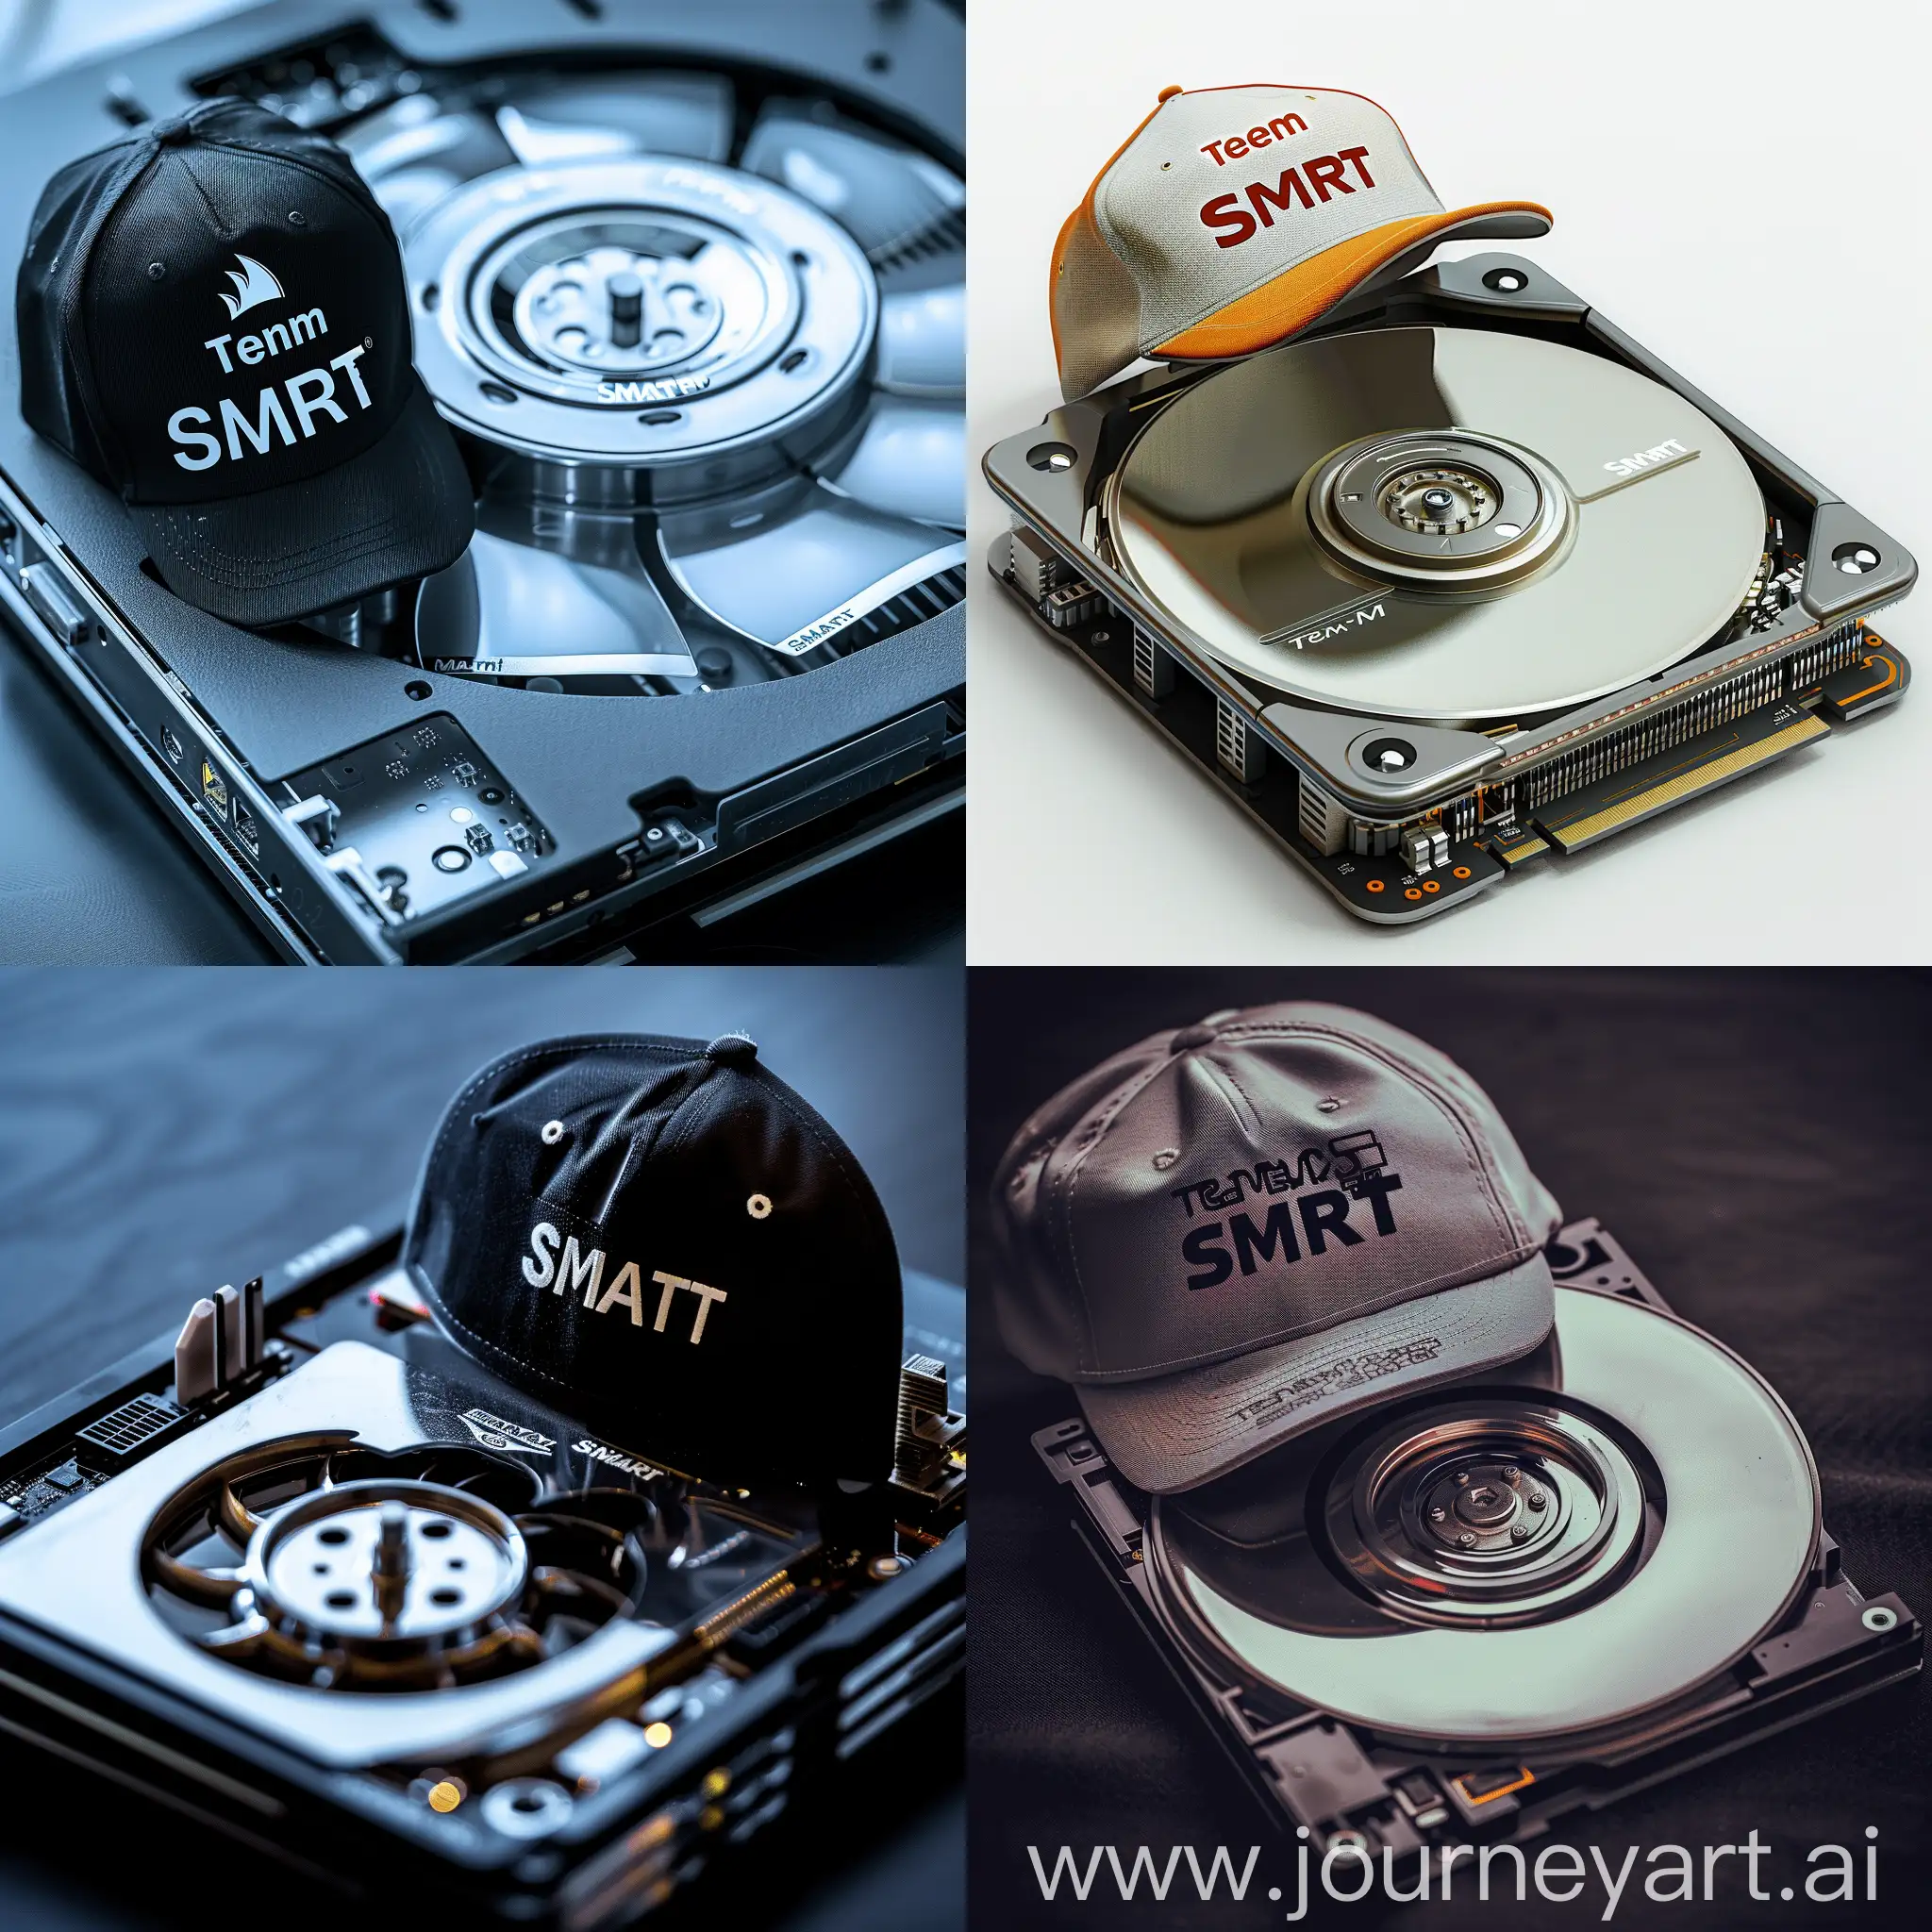 a computer hard disk, cover removed, wearing a cap with the text "Team SMART"